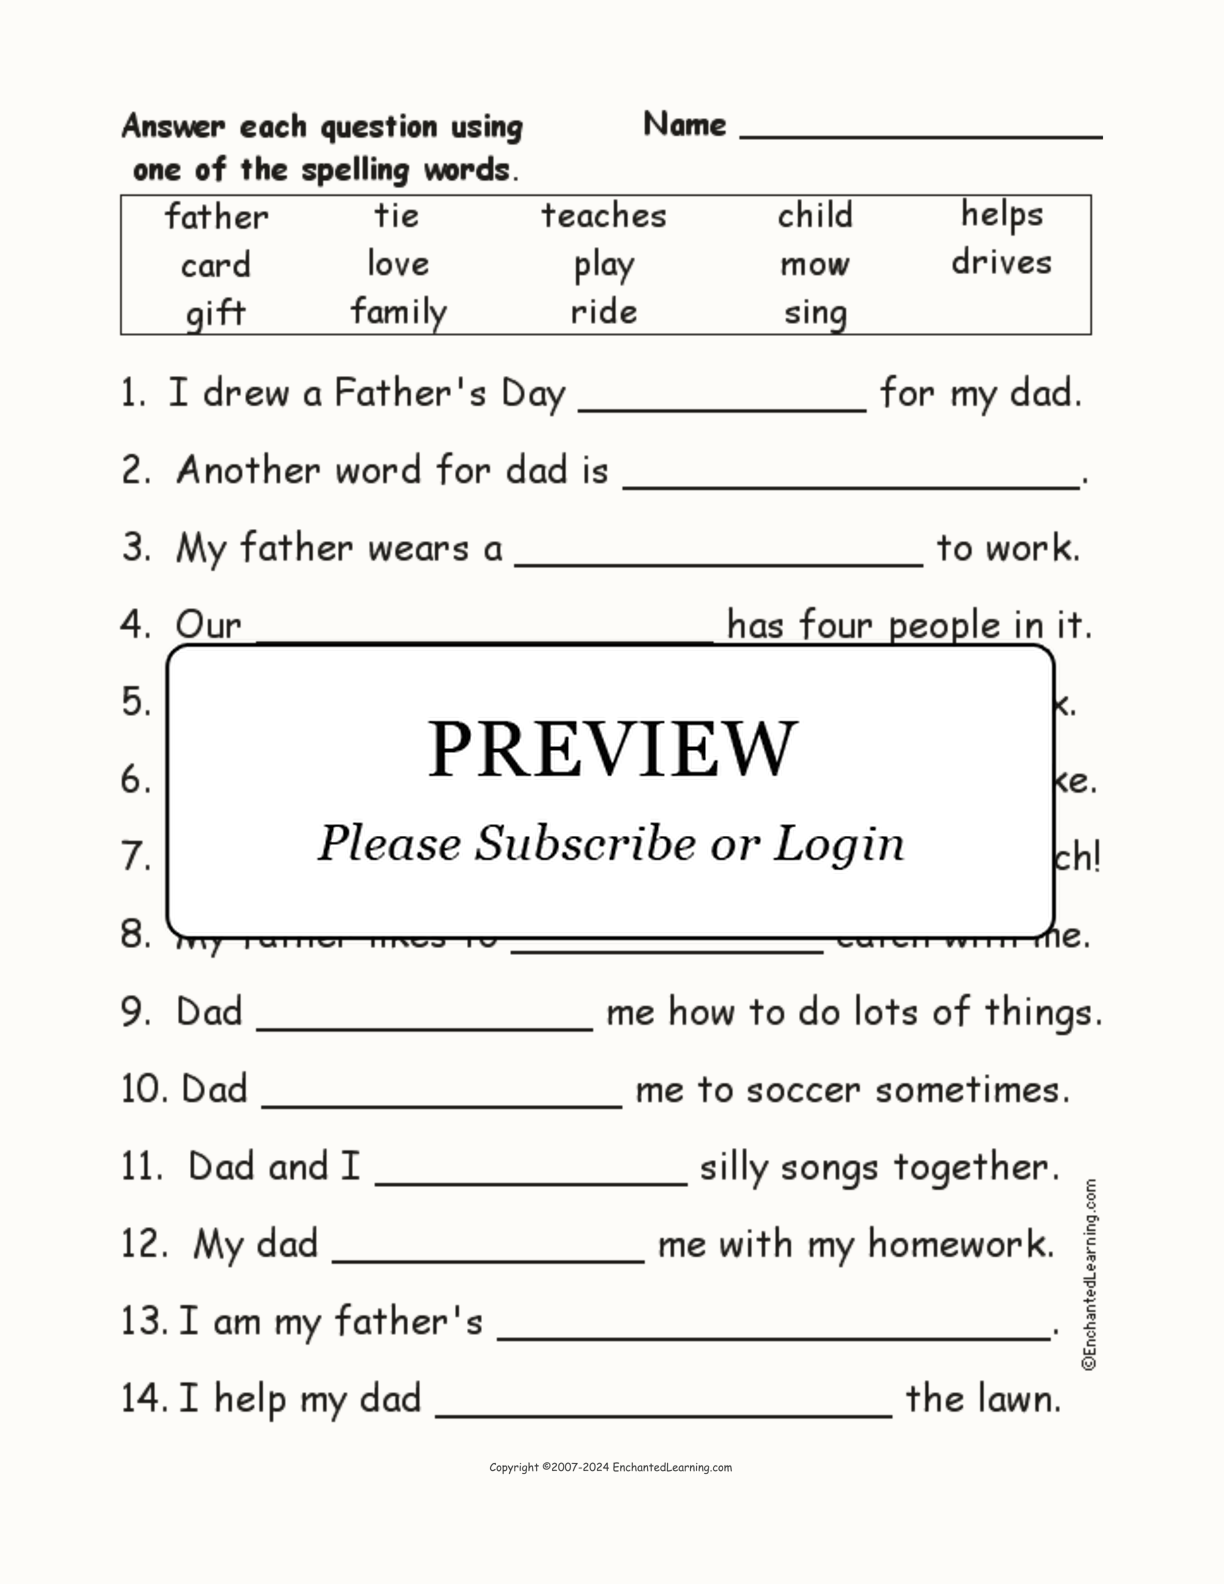 Father's Day Spelling Word Questions interactive worksheet page 1